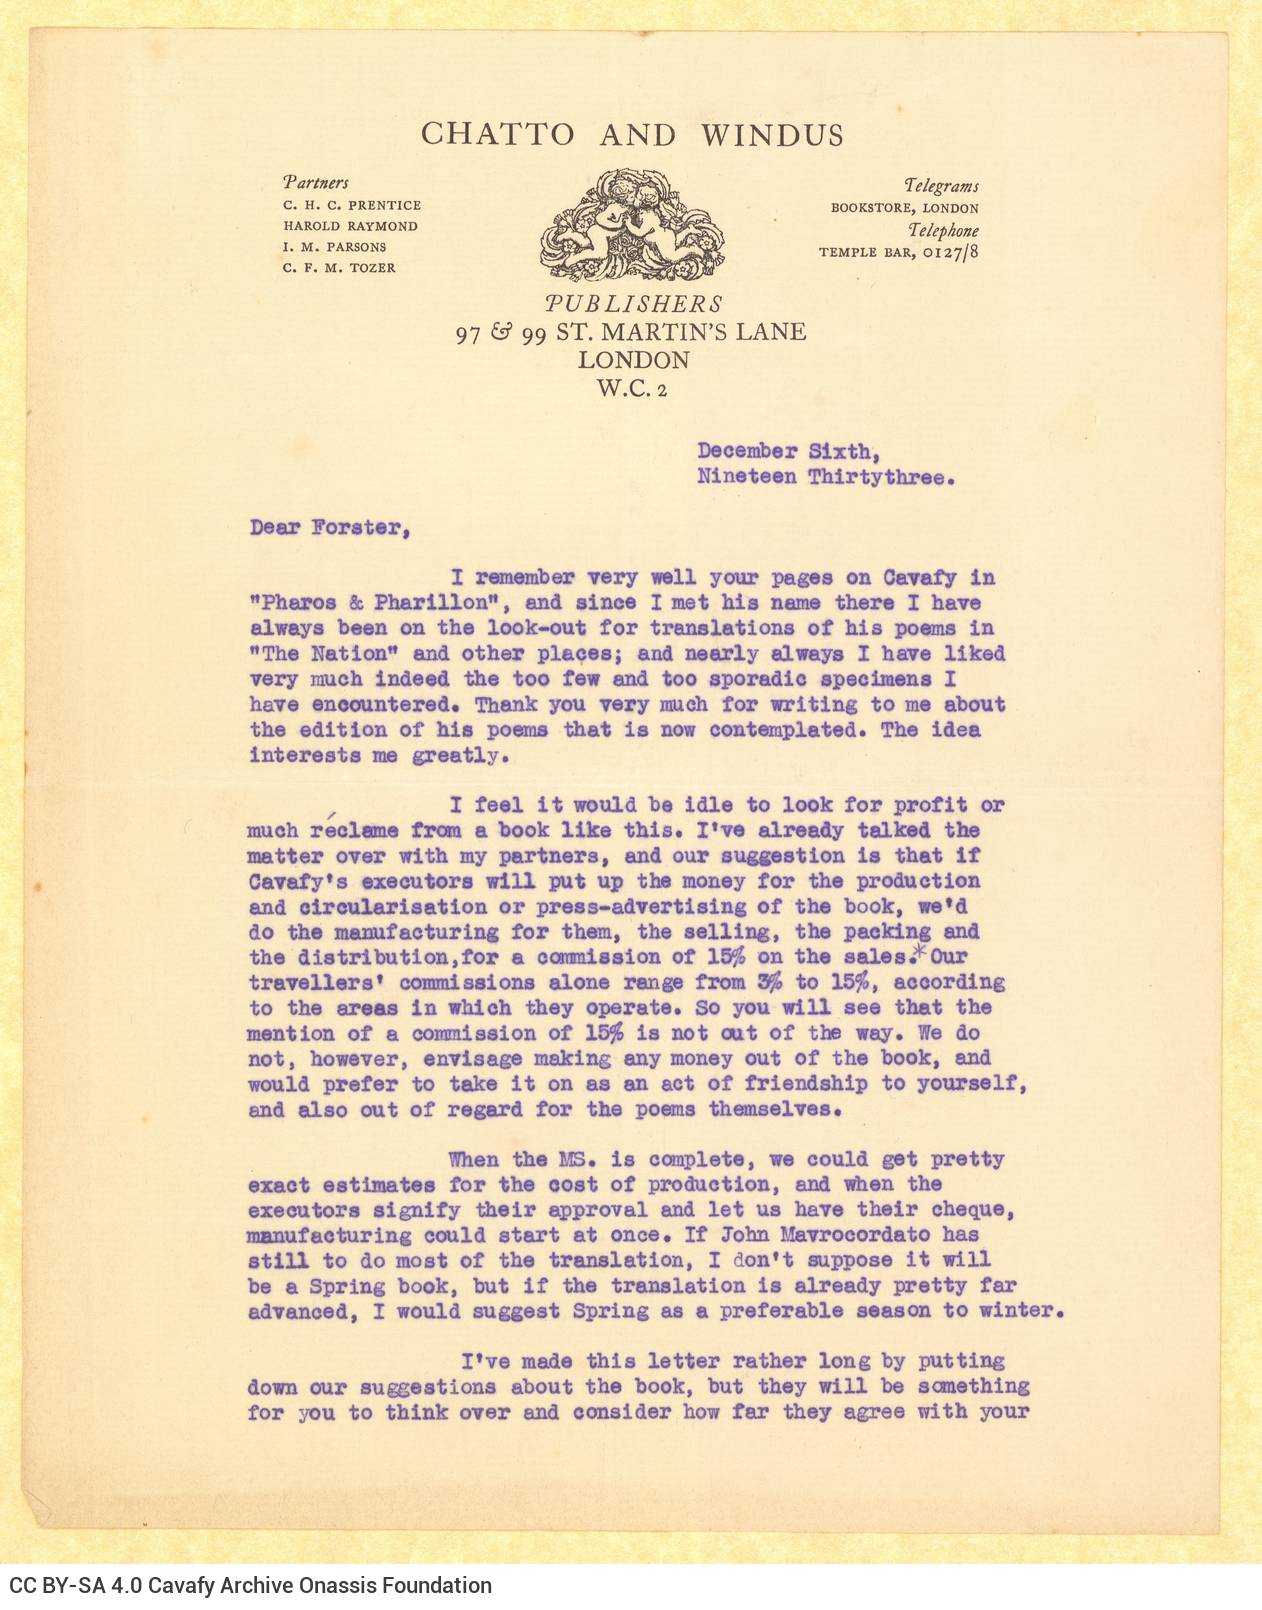 Typewritten letter by Charles Prentice (C. H. C. Prentice) to E. M. Forster on one side of two letterheads of the Chatto & Wi